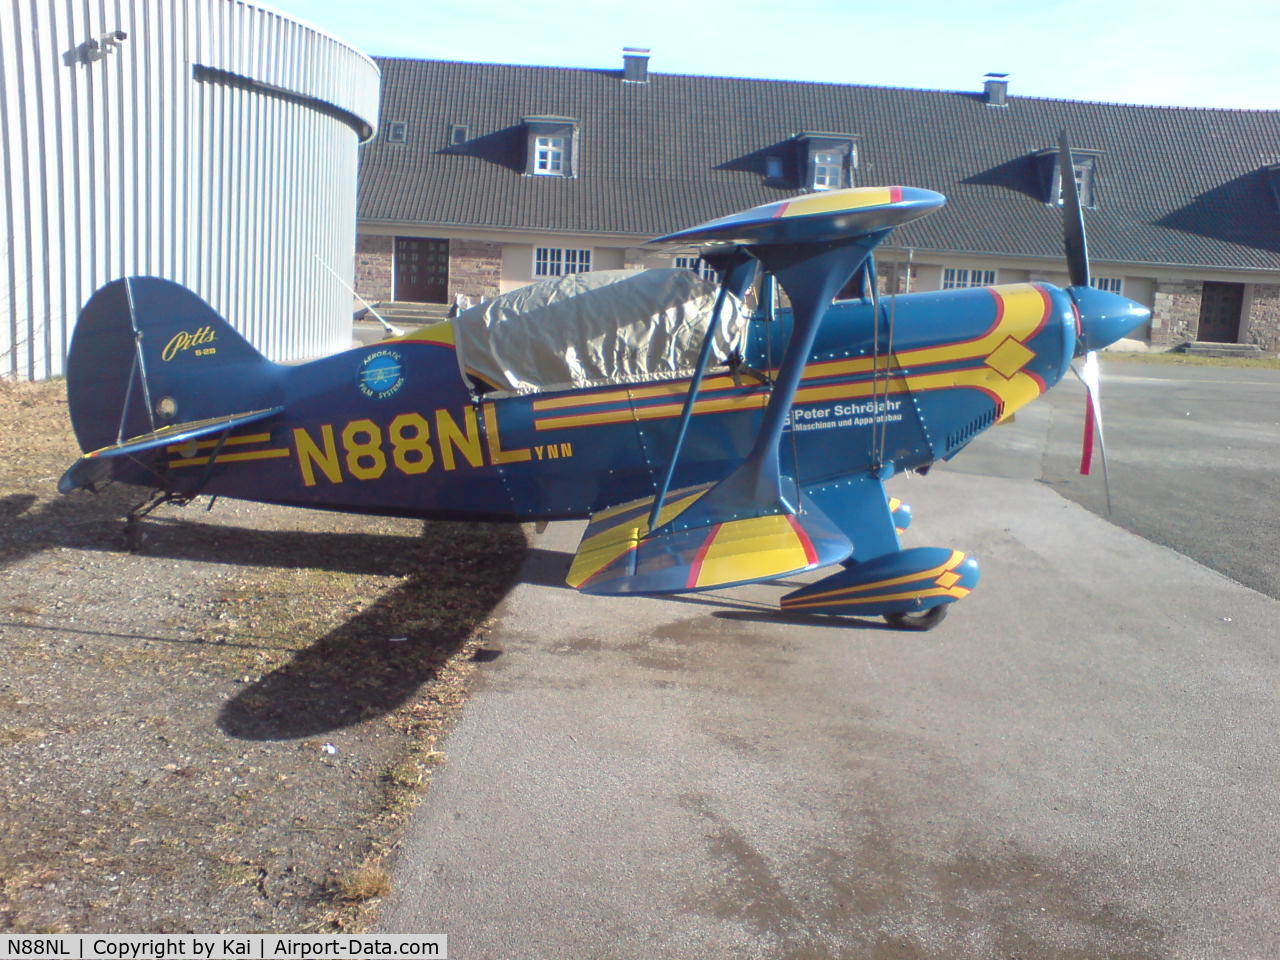 N88NL, 1988 Christen Pitts S-2B Special C/N 5147, Pitts S-2